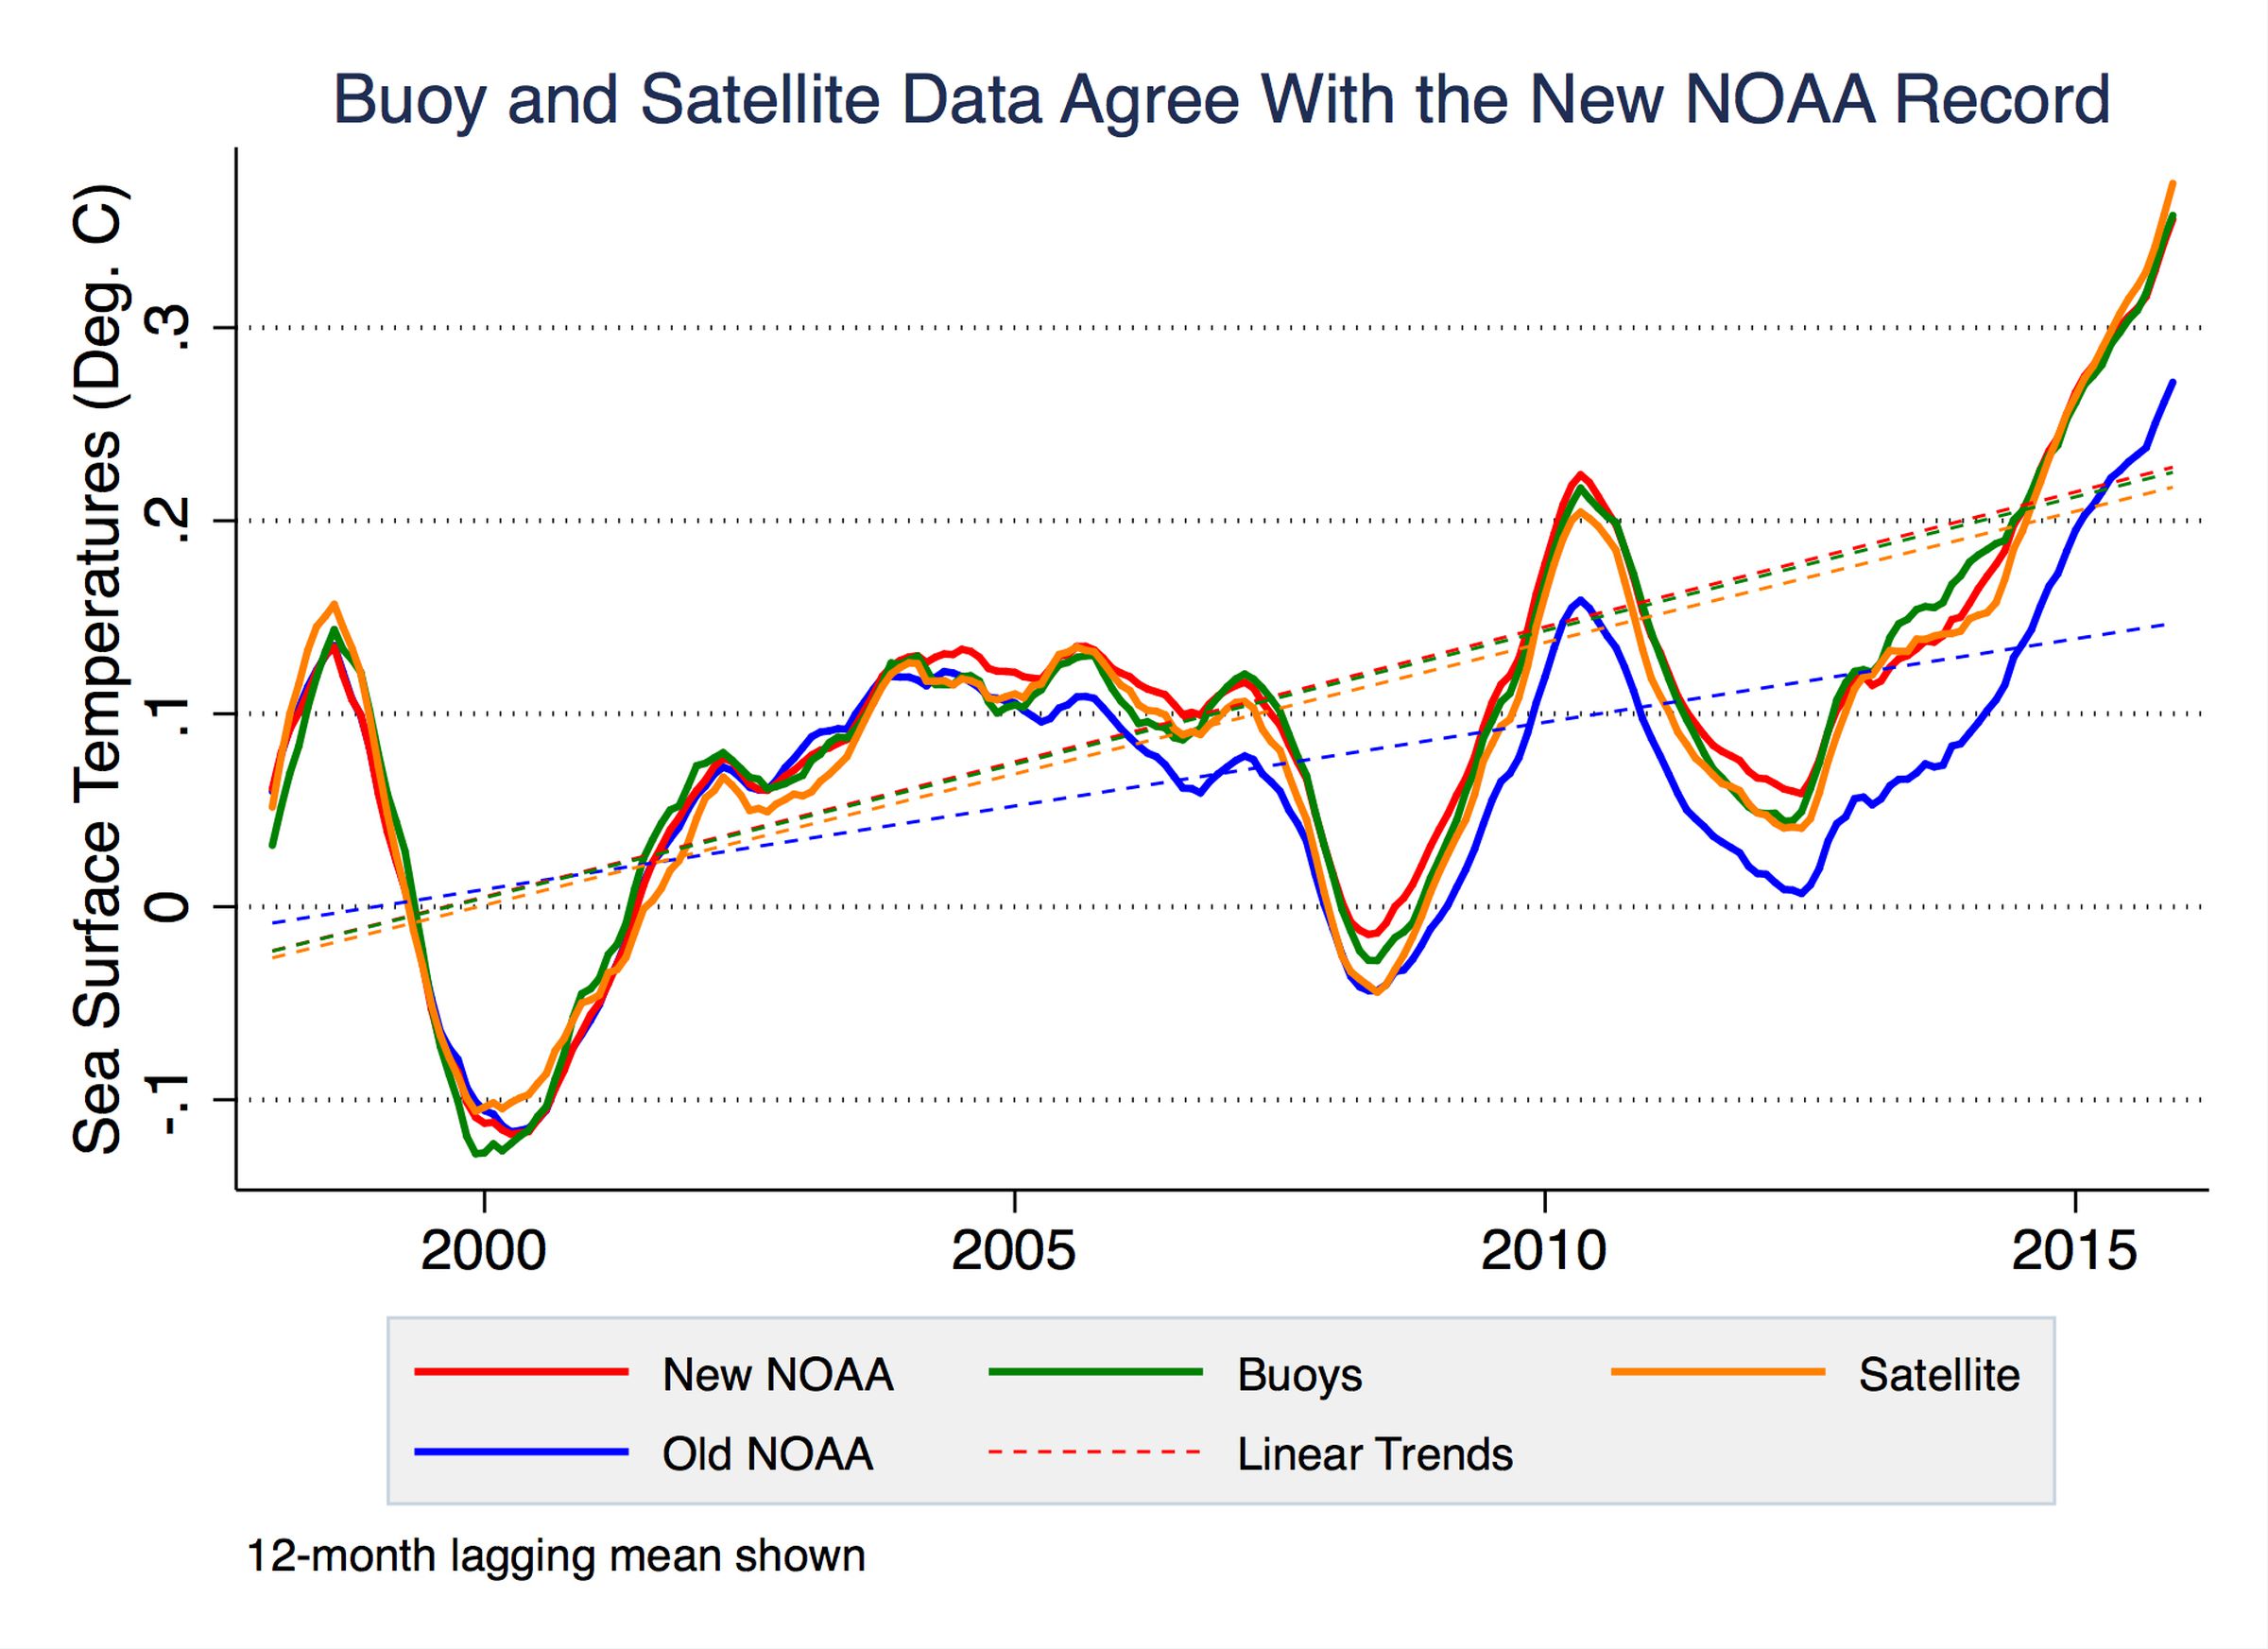 Ocean buoy (green) and satellite data (orange) measuring sea surface temperatures compared to updated NOAA predictions concluded in 2015 (red) after adjusting for a cold bias in buoy temperature measurements. NOAA's earlier assessment (blue) underestimated sea surface temperature changes.